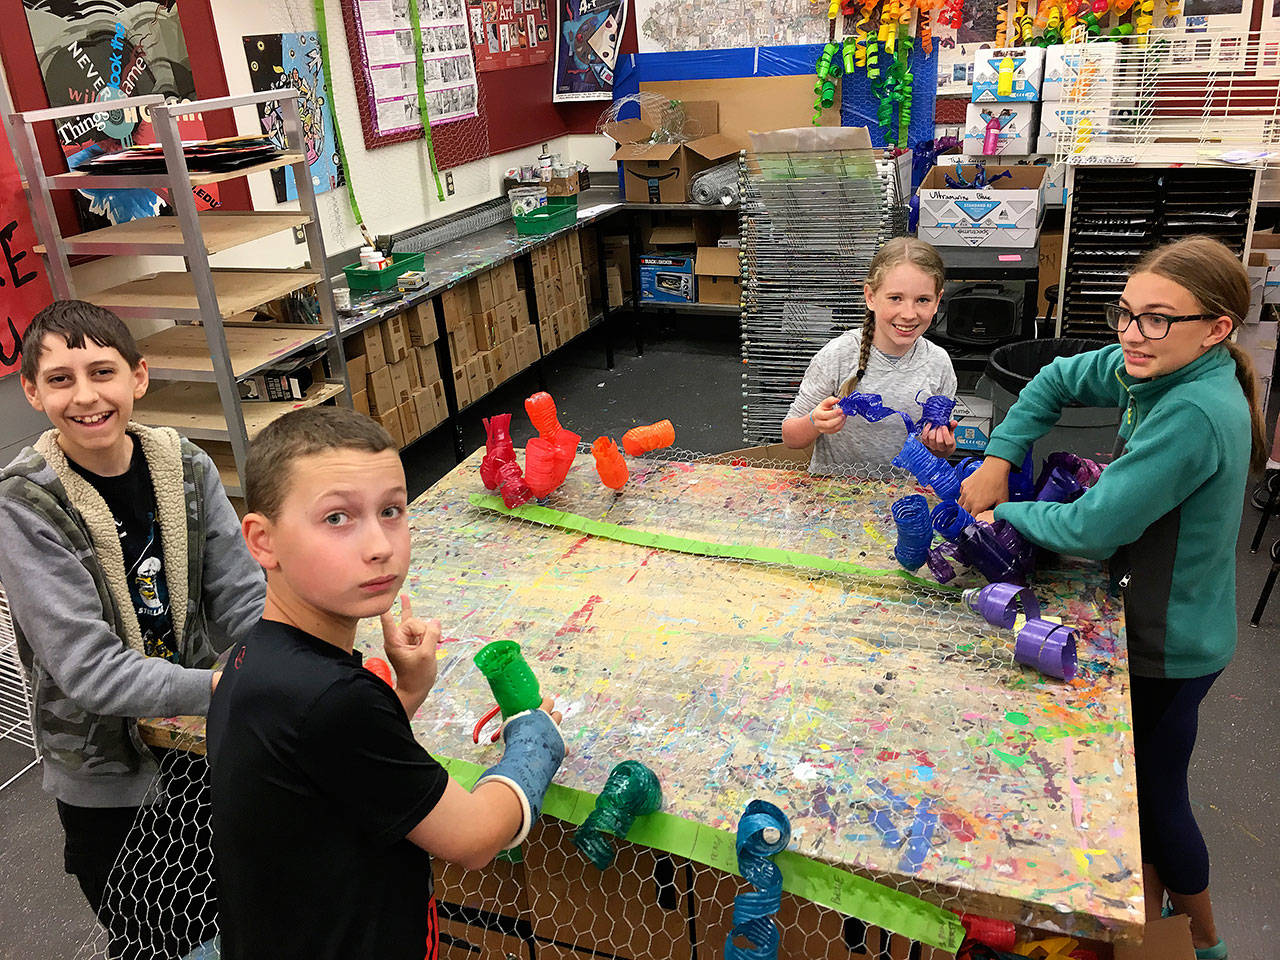 Julie Lagace’s seventh grade art students work on their Chihuly-inspired chandelier. From left: Josh Liebes, Brandon Wallace, Isabel Phalen, Audrey Newbrey-Smith. Photos courtesy of Julie Lagace.